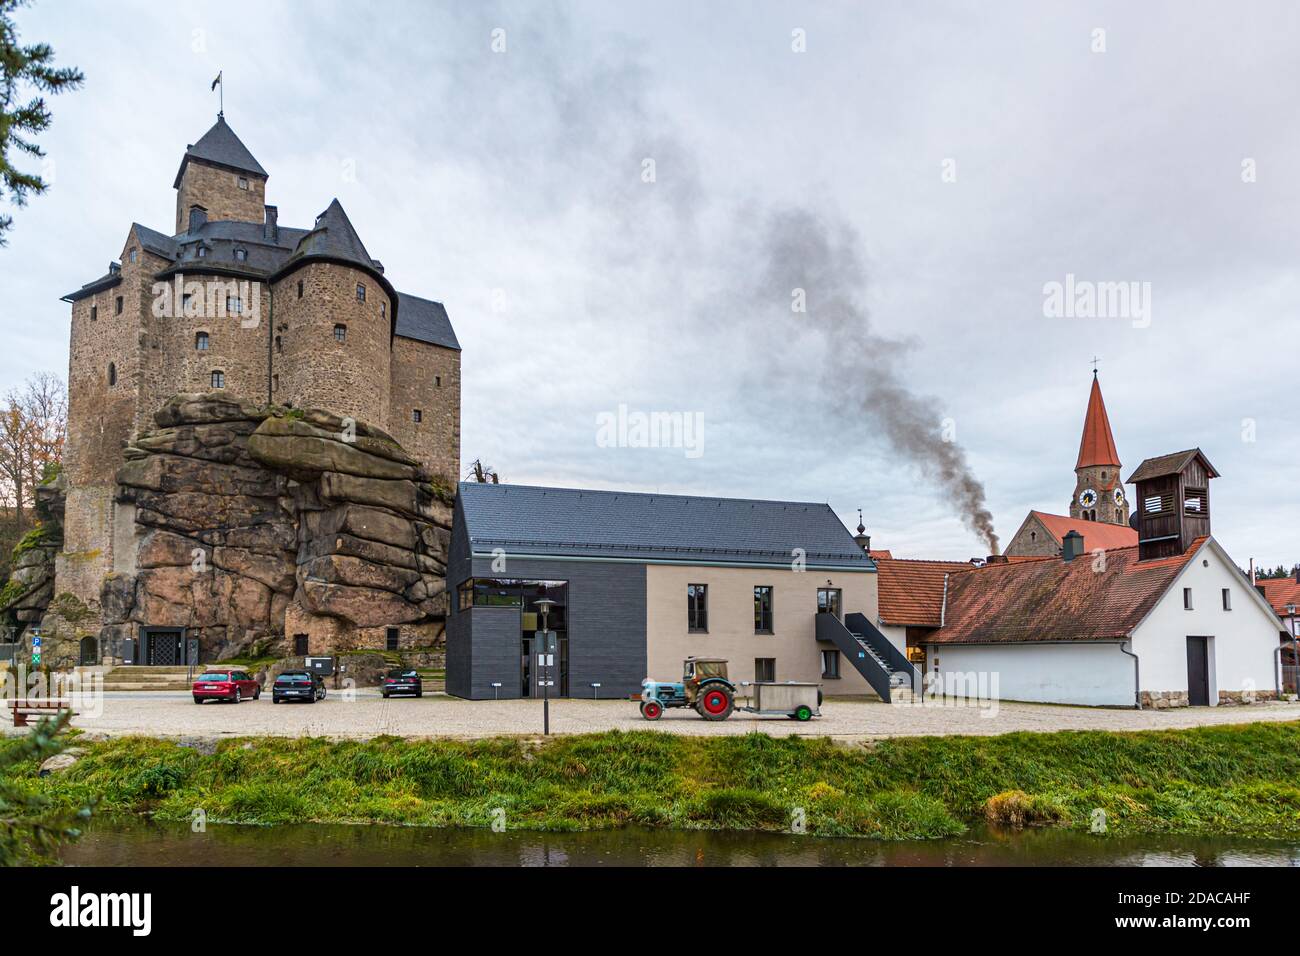 Black smoke rises above the Traditional Community Zoigl Brewery in Falkenberg, Germany Stock Photo